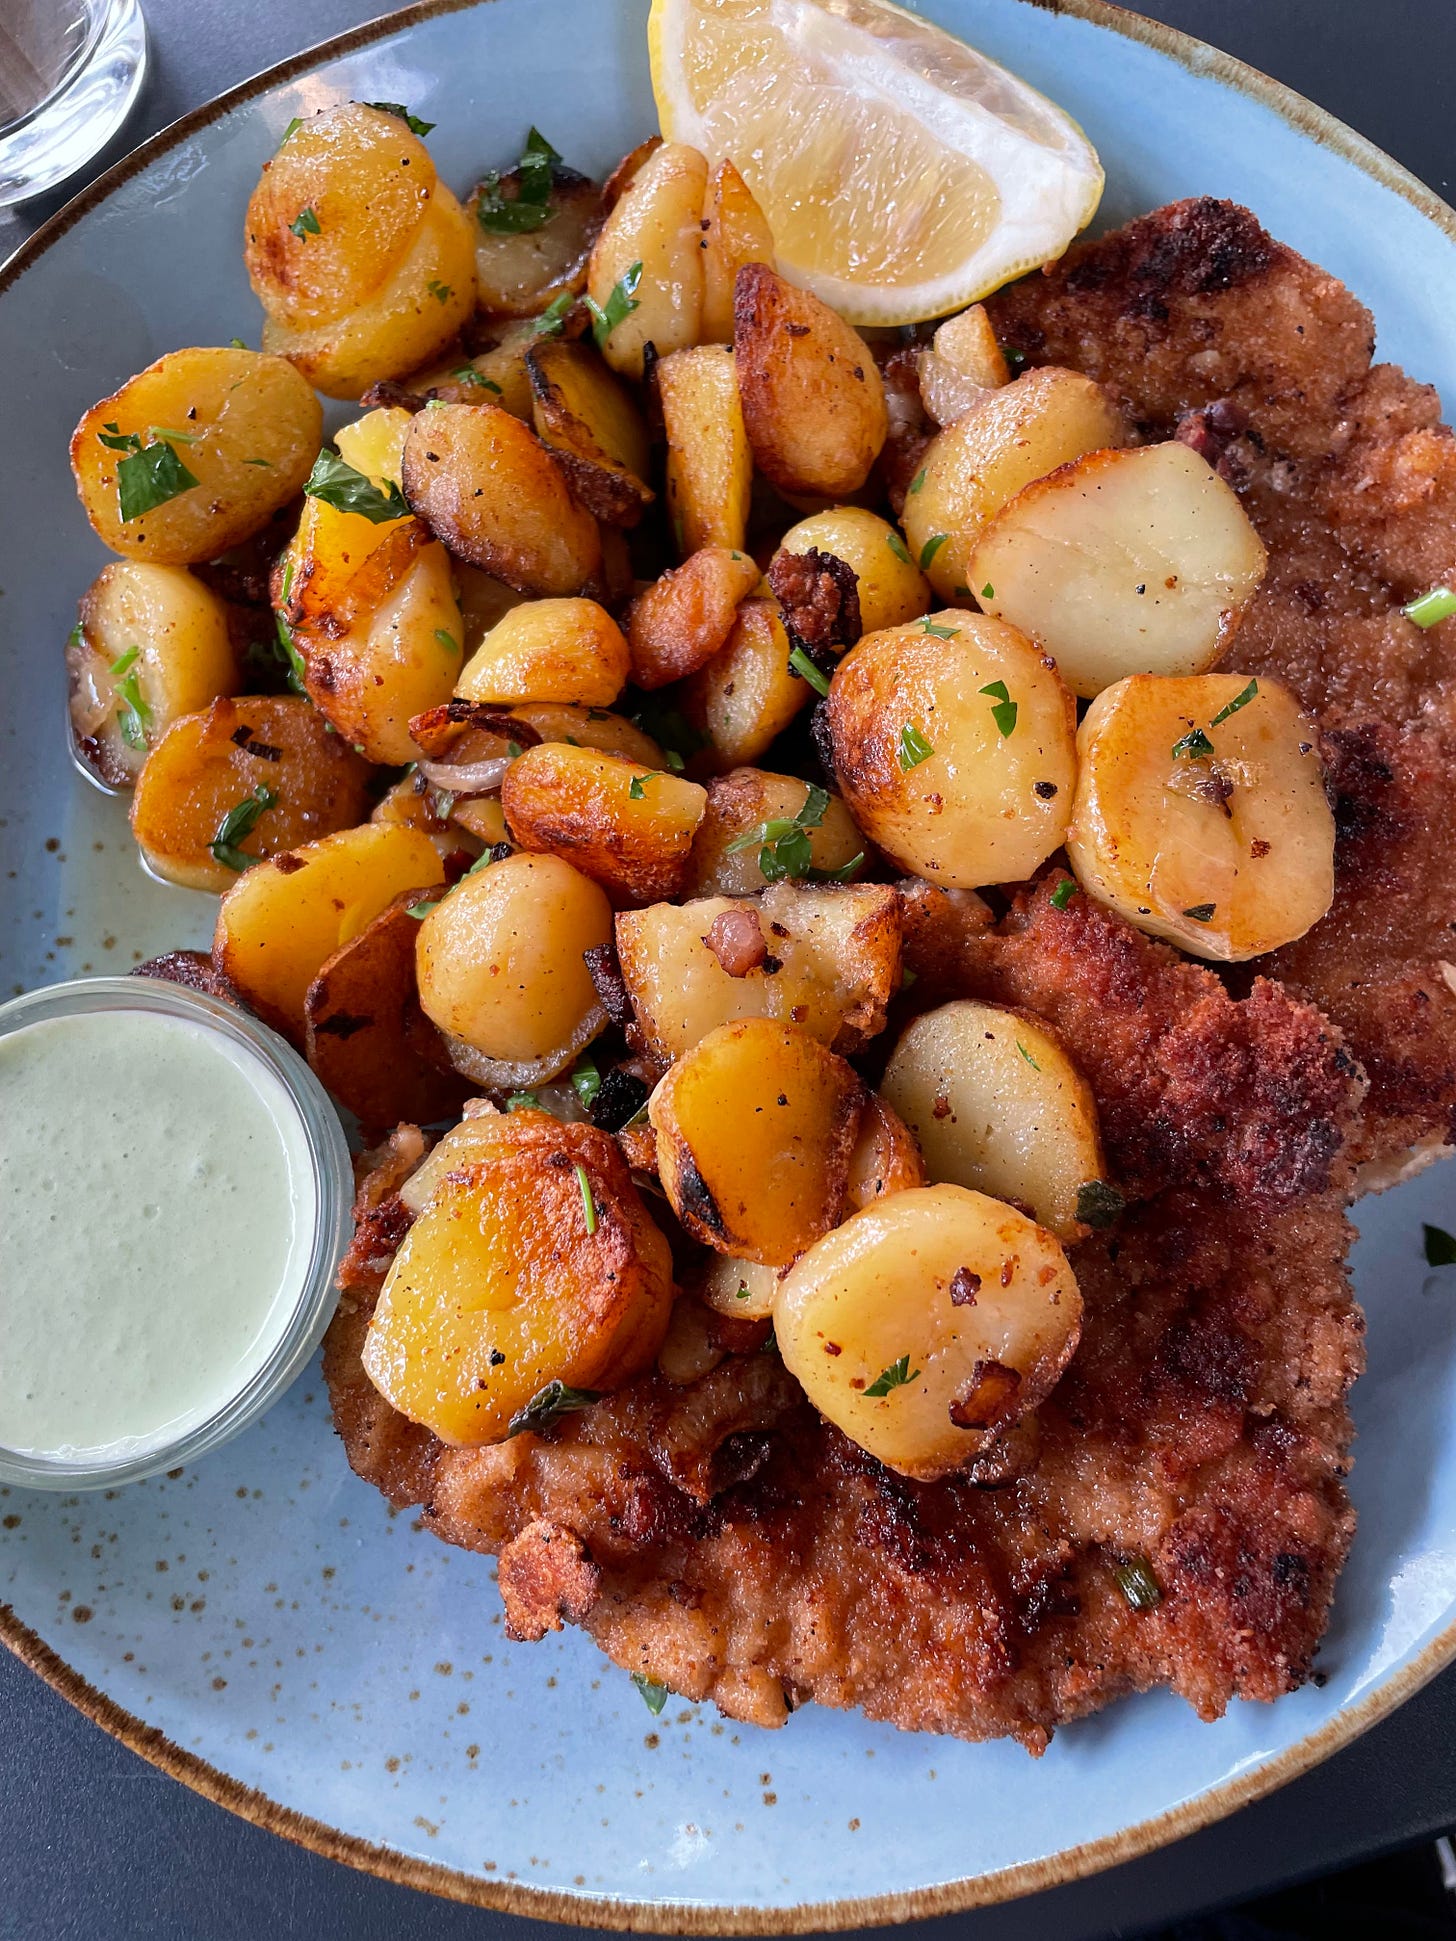 Fried schnitzel covered in roasted potatoes